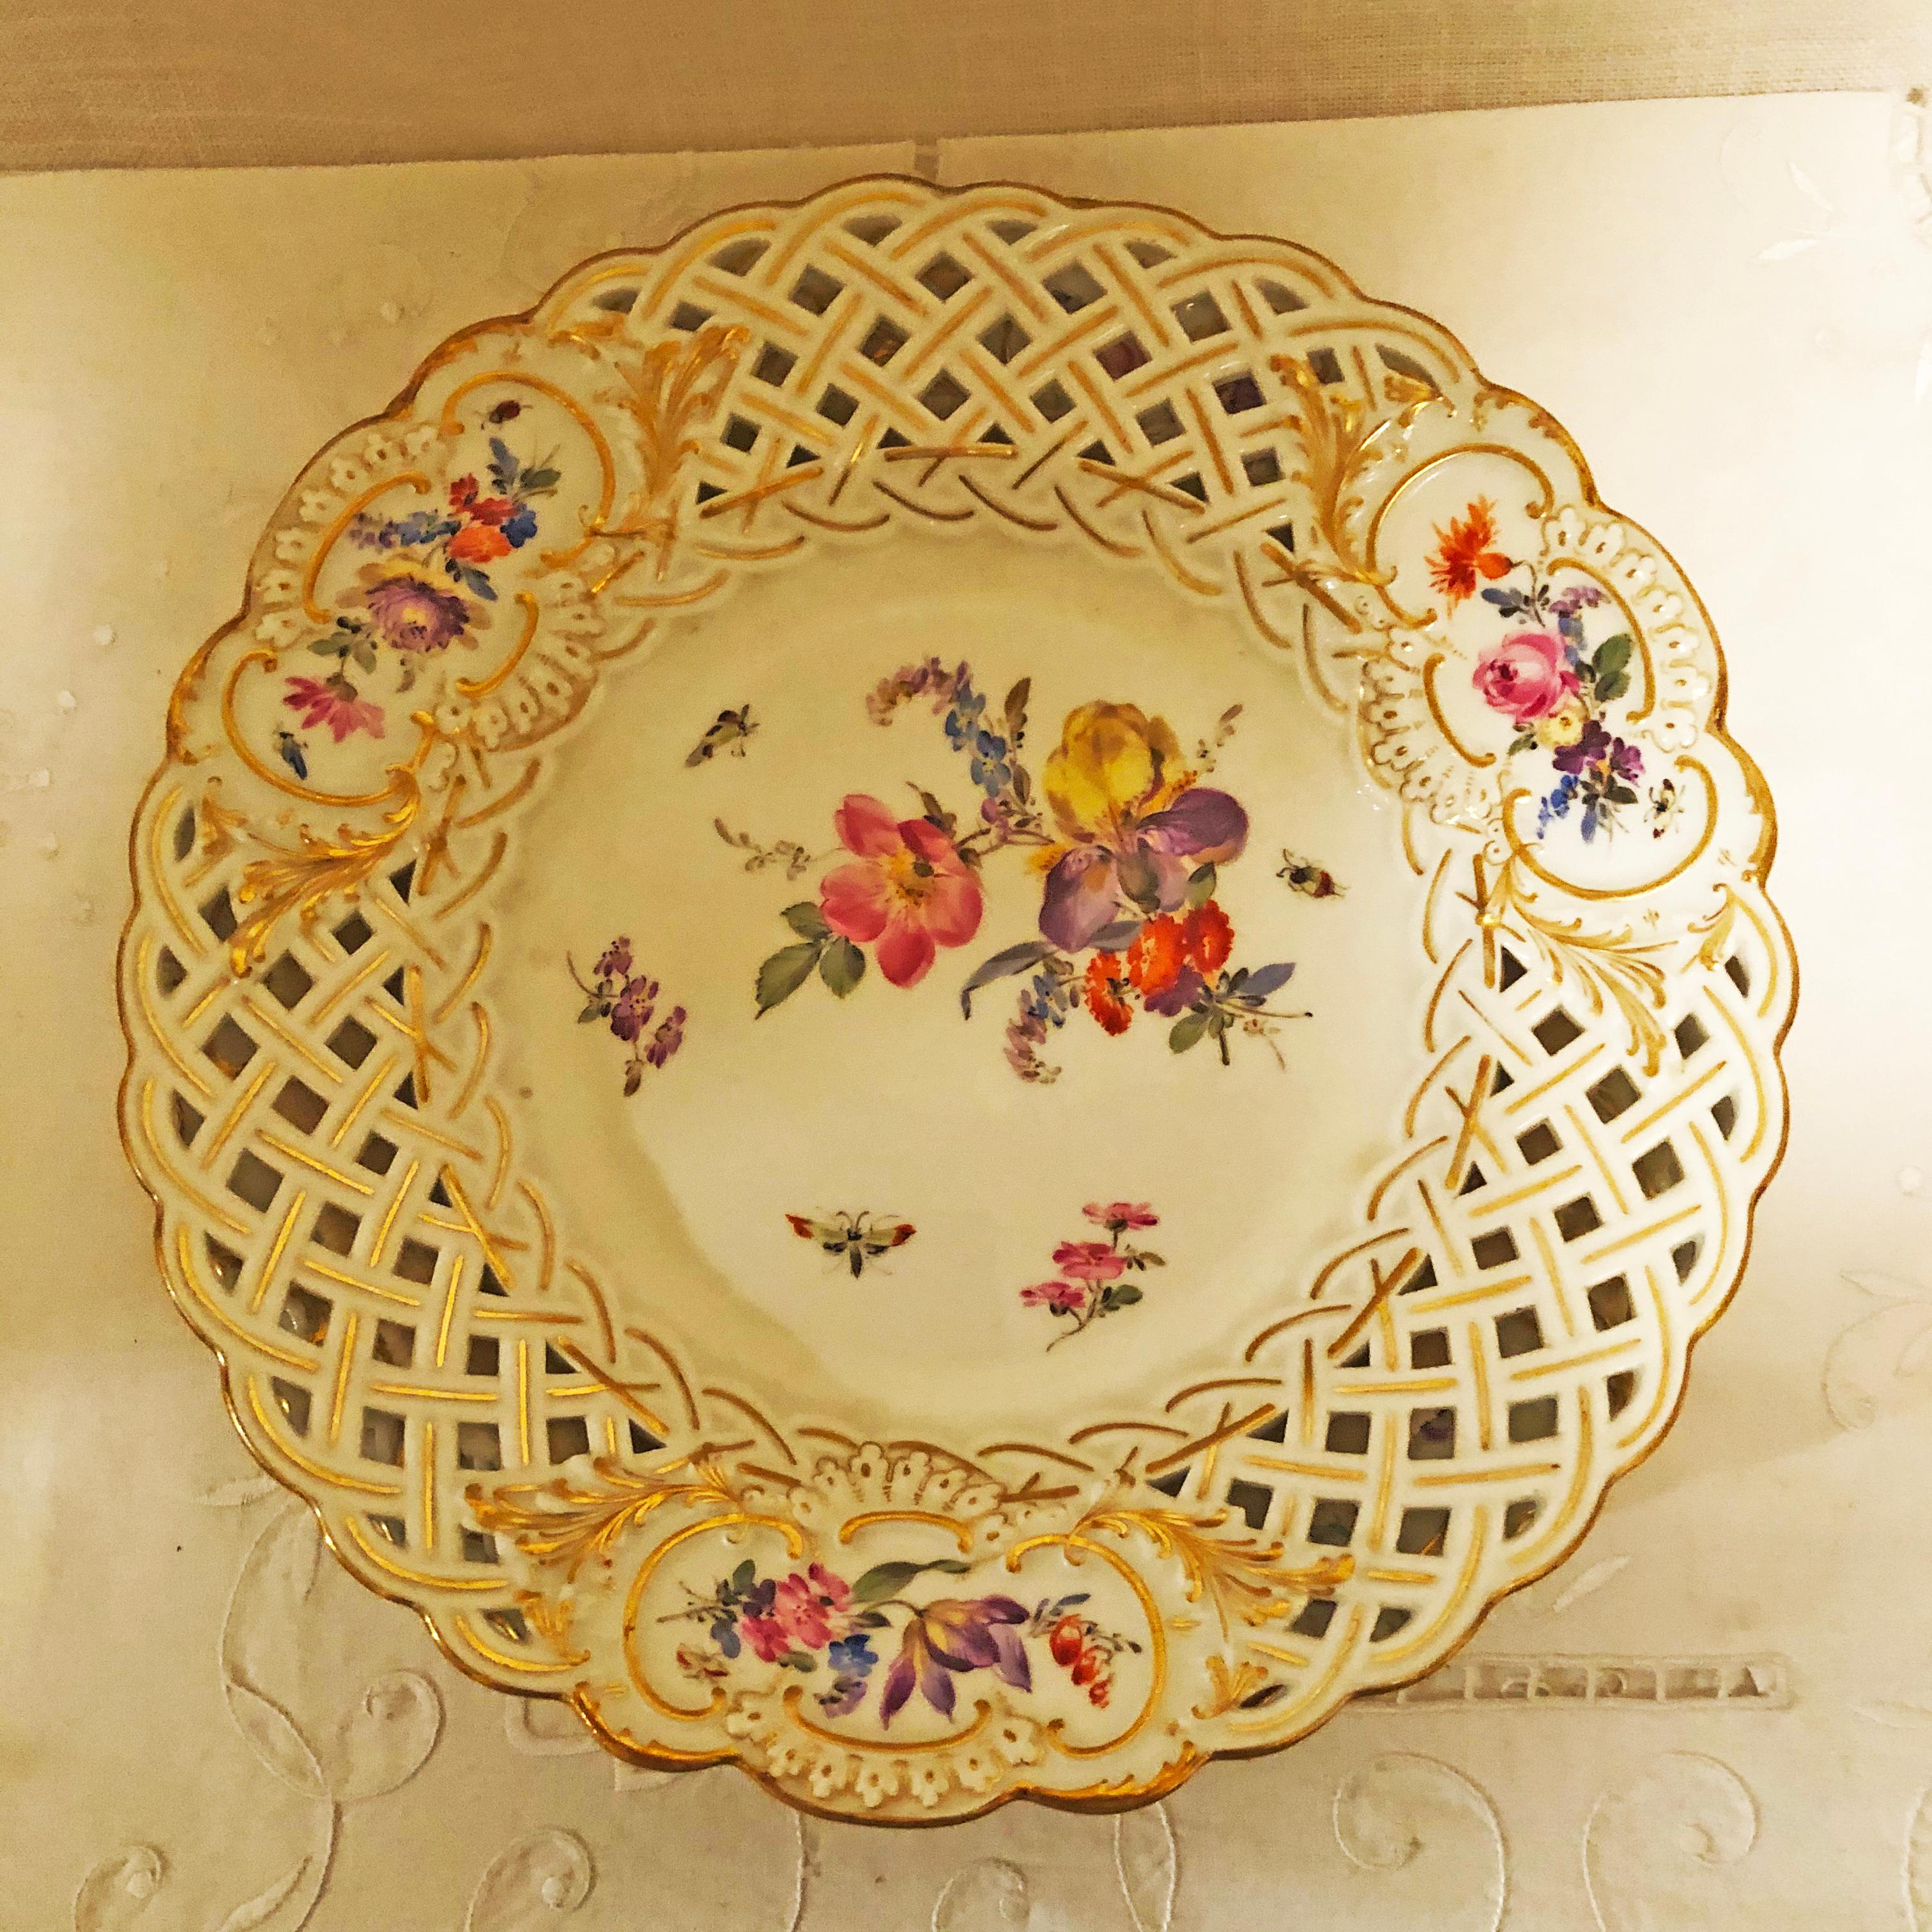 Romantic Set of Ten Meissen Reticulated Dessert Plates Painted with Flowers and Insects